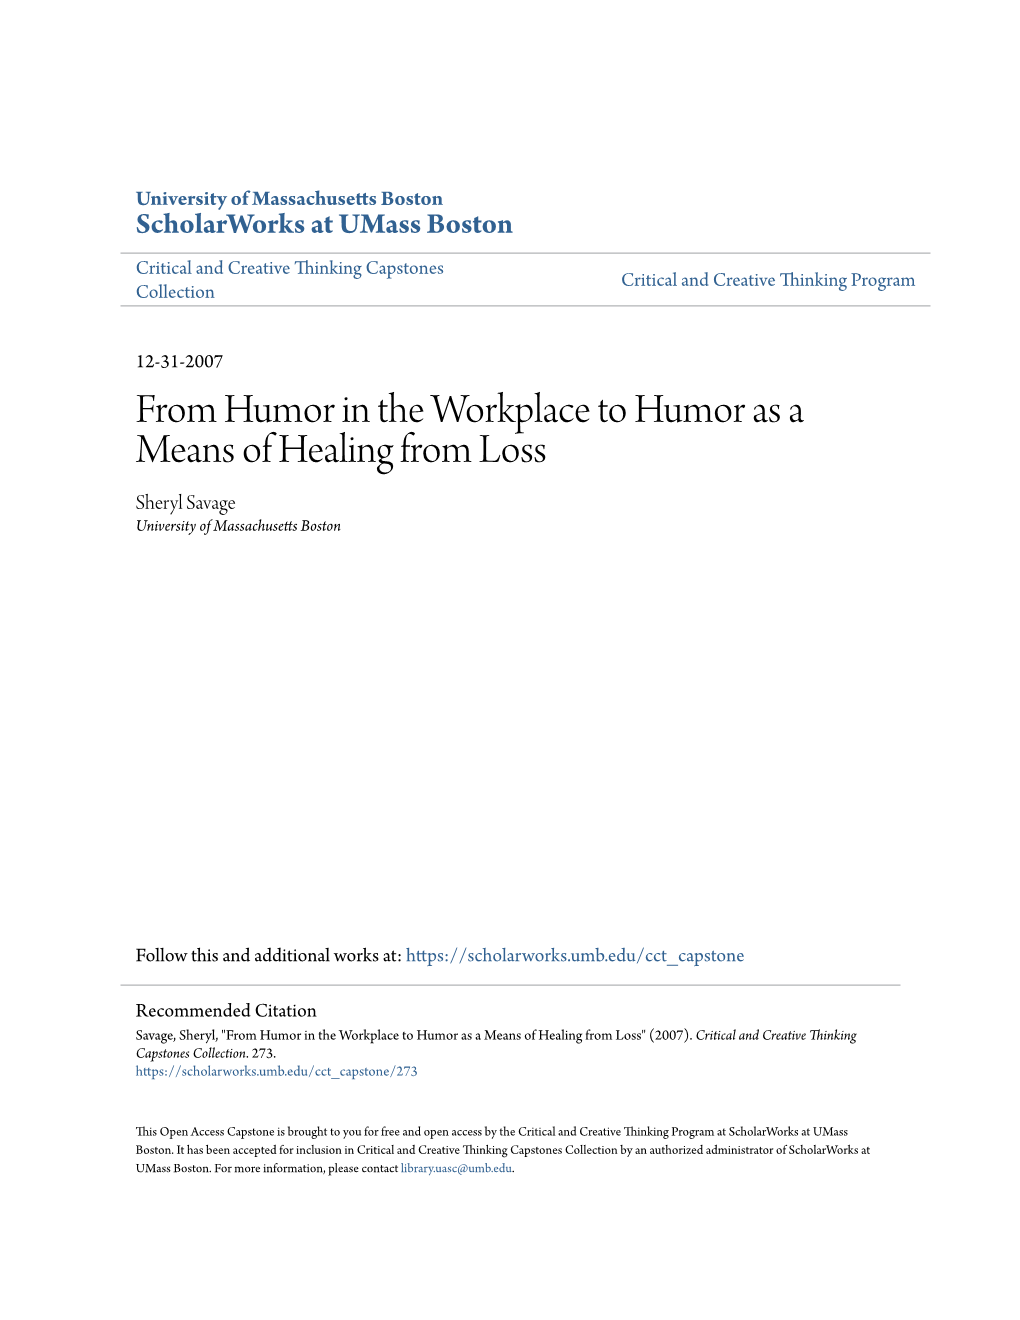 From Humor in the Workplace to Humor As a Means of Healing from Loss Sheryl Savage University of Massachusetts Boston